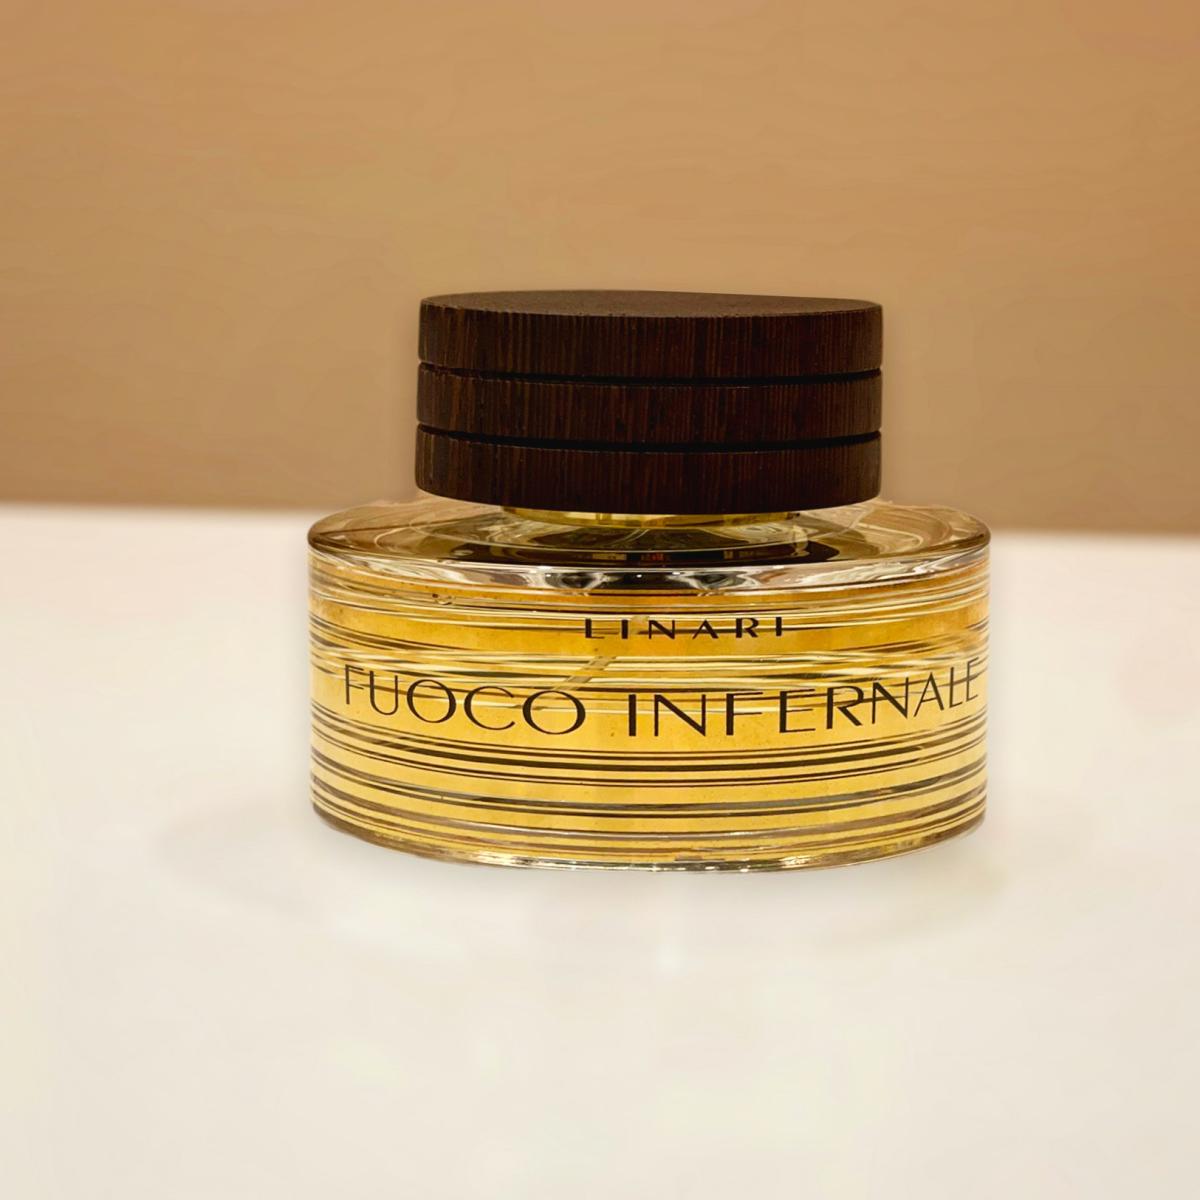 Fuoco Infernale Linari perfume - a fragrance for women and men 2010